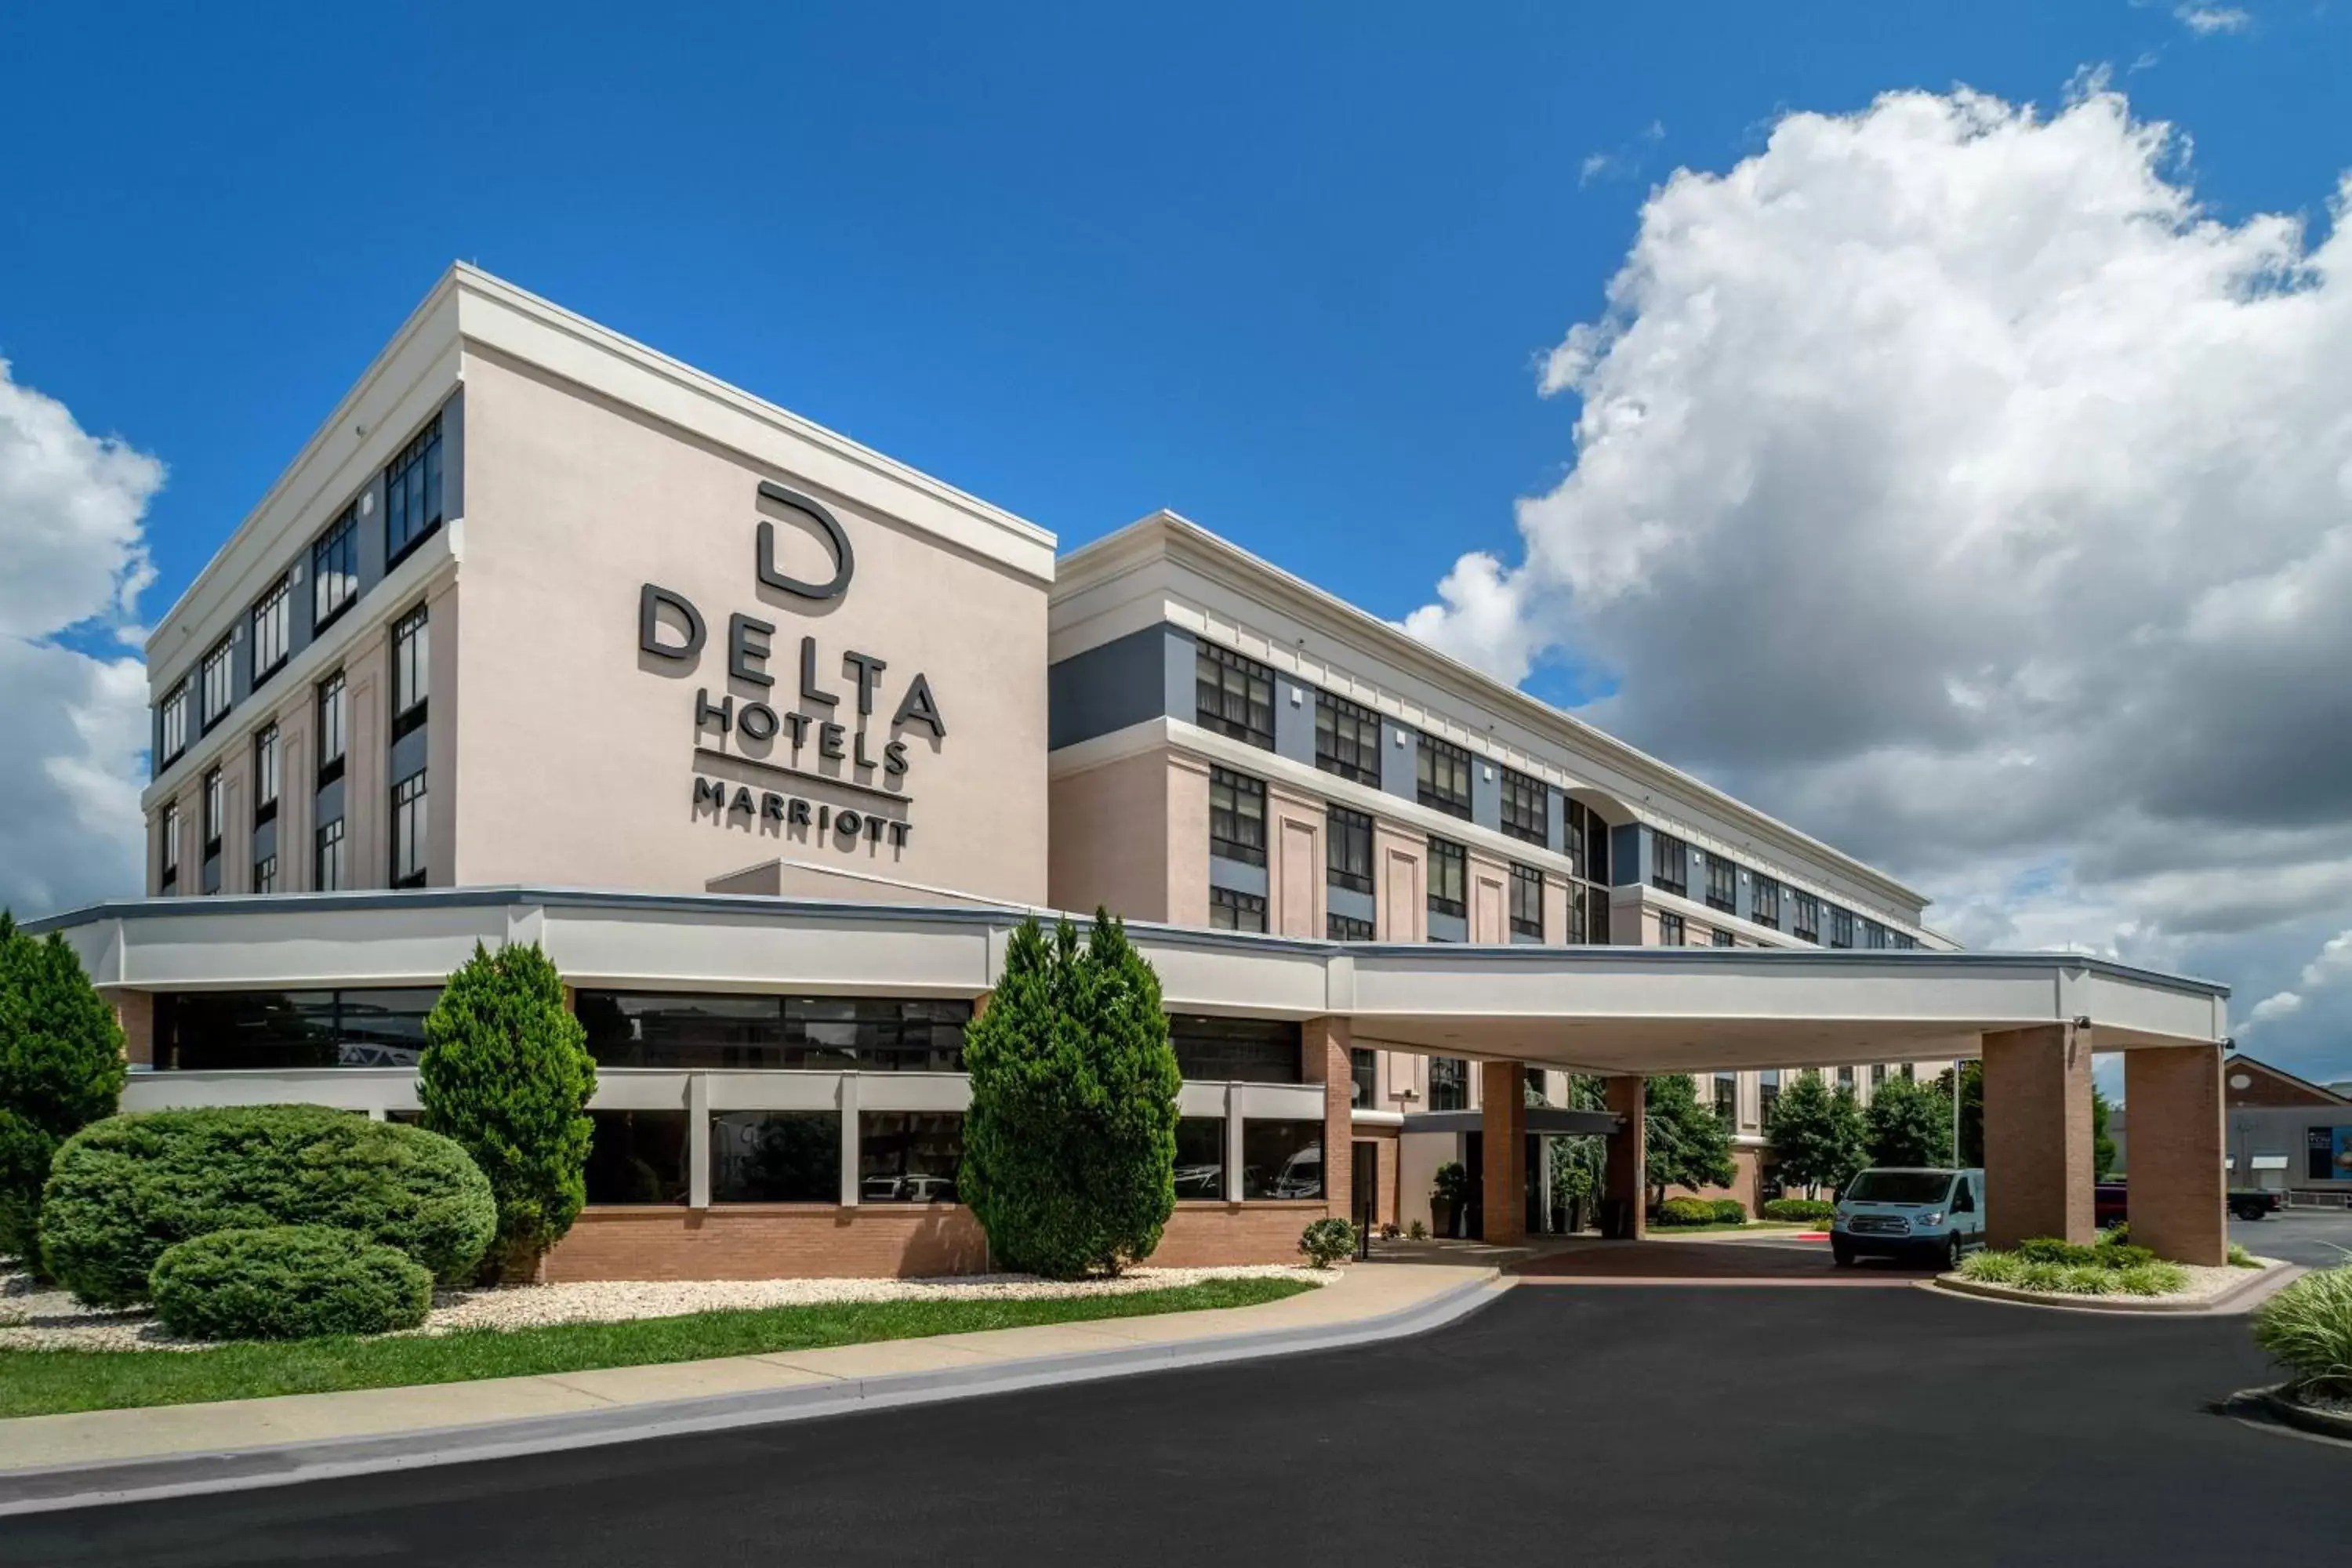 Property Building in Delta Hotels Huntington Downtown